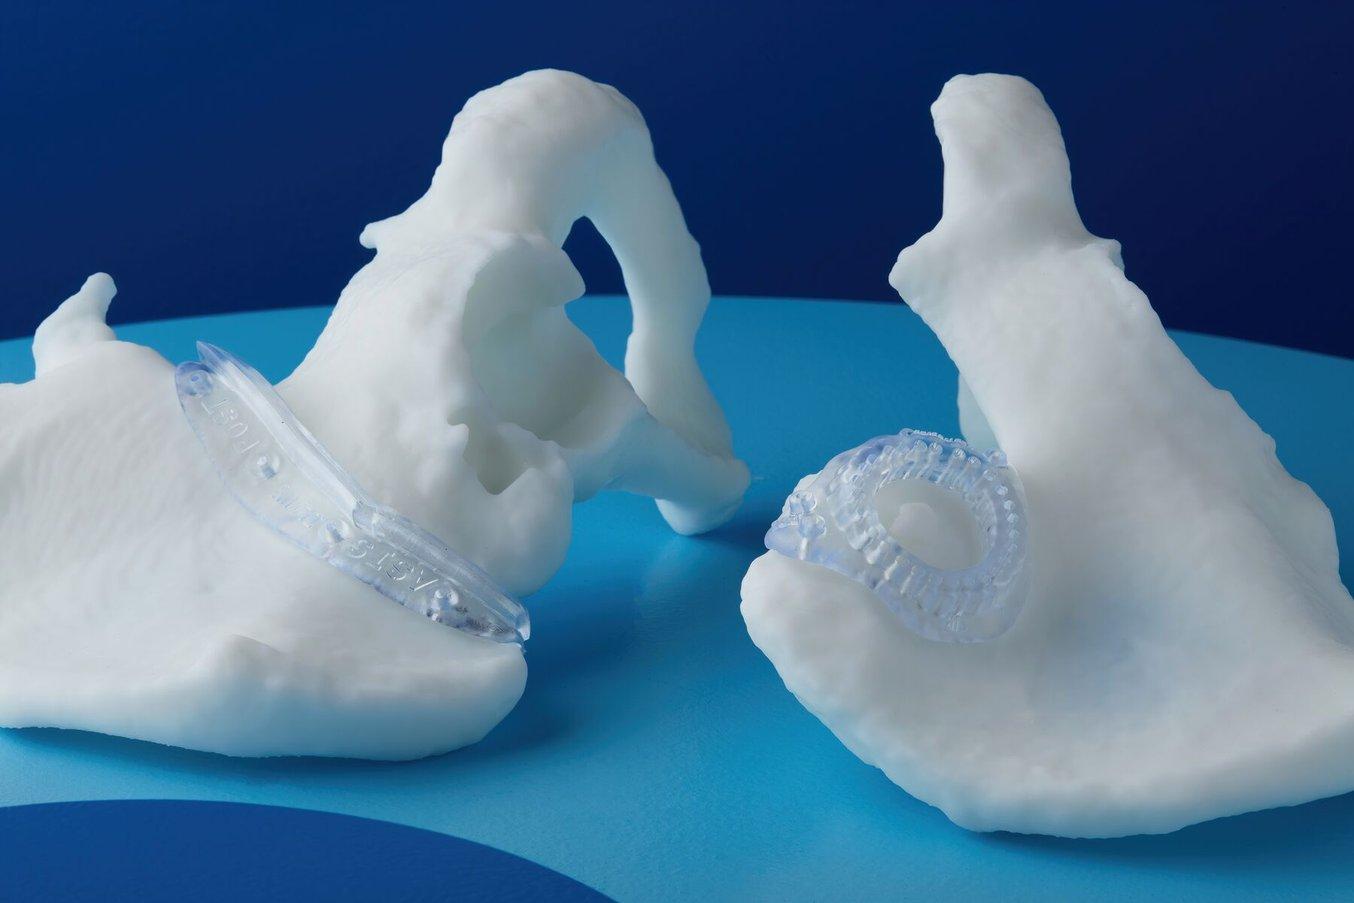 3D printed surgical guides in white resin